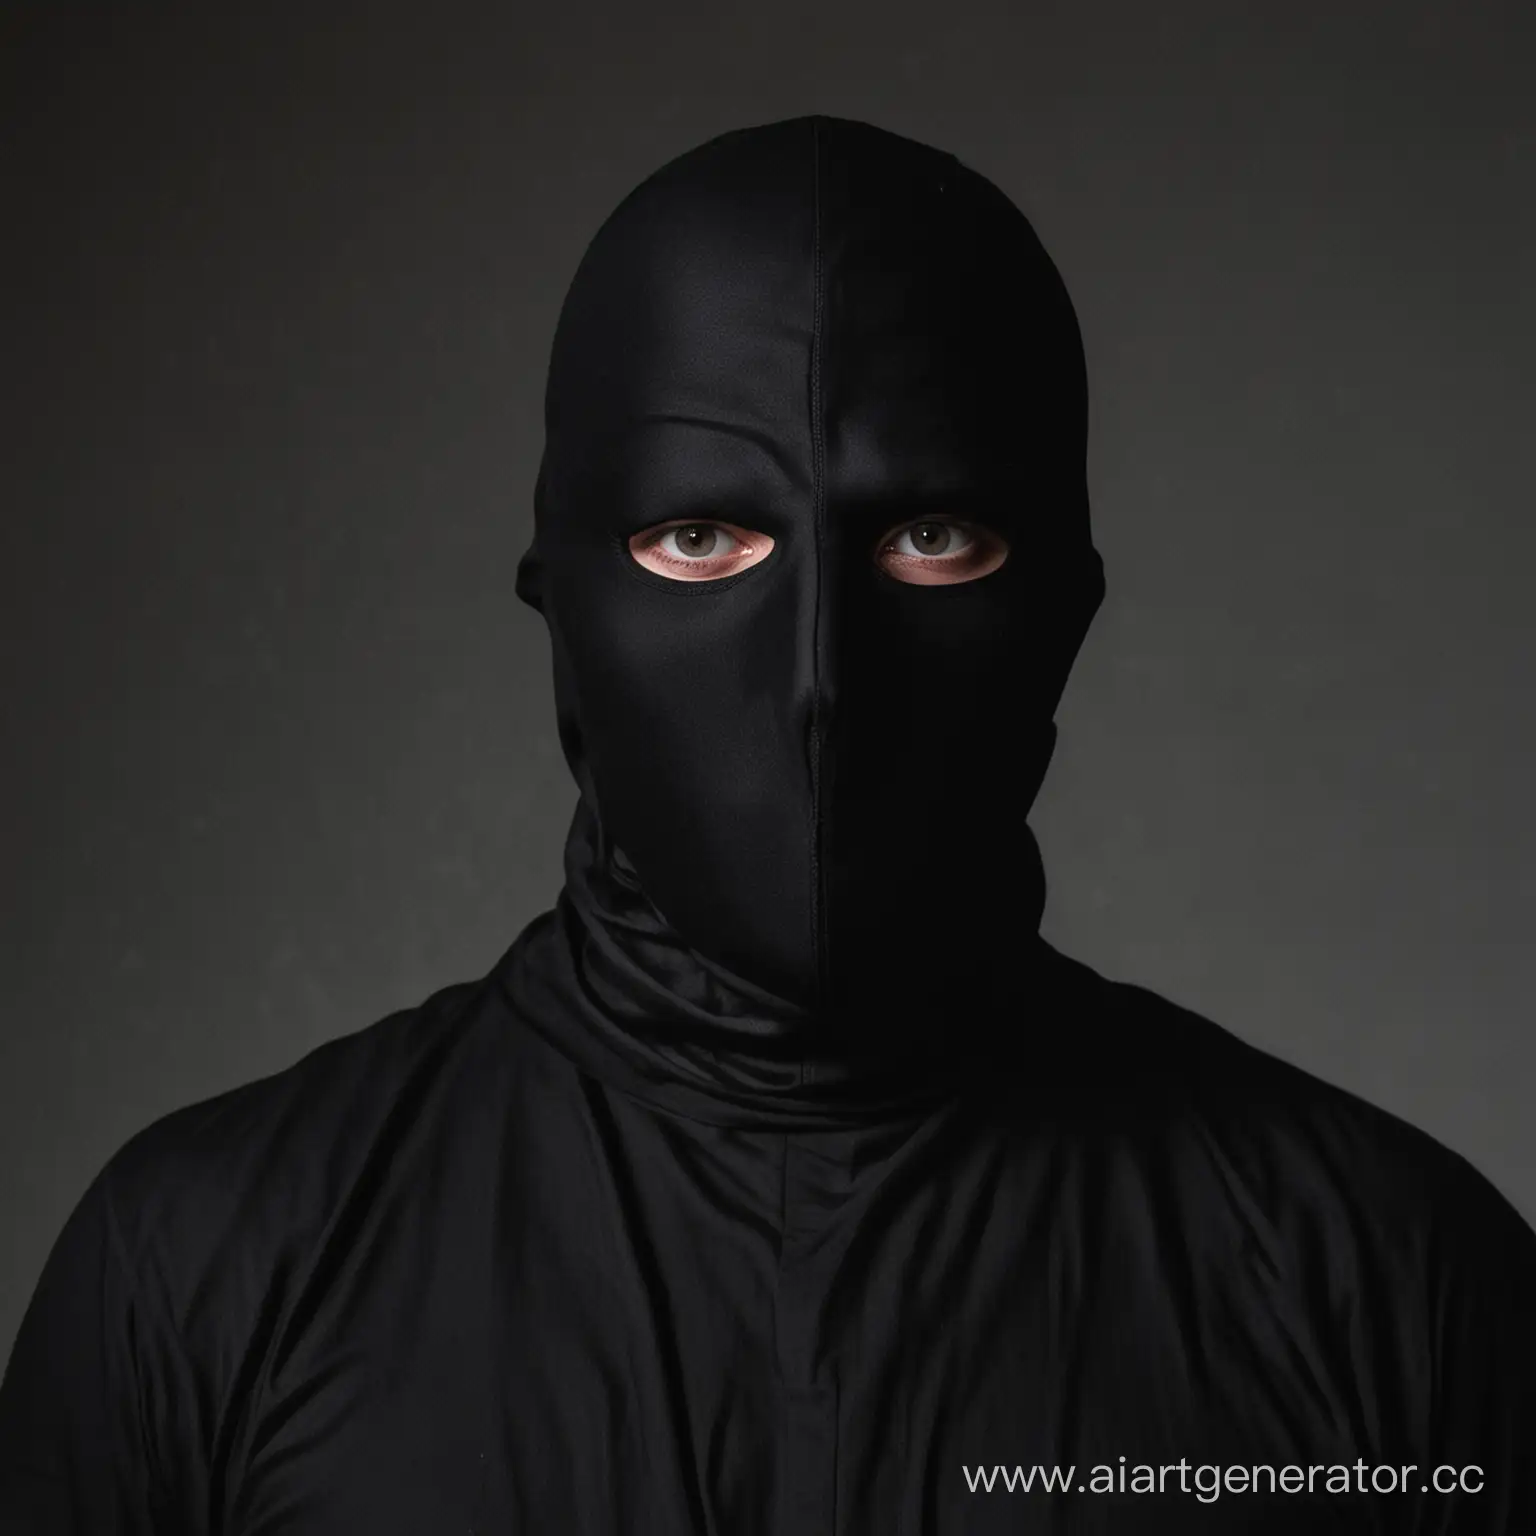 a man in all black, wearing a black mask, his eyes and face are not visible